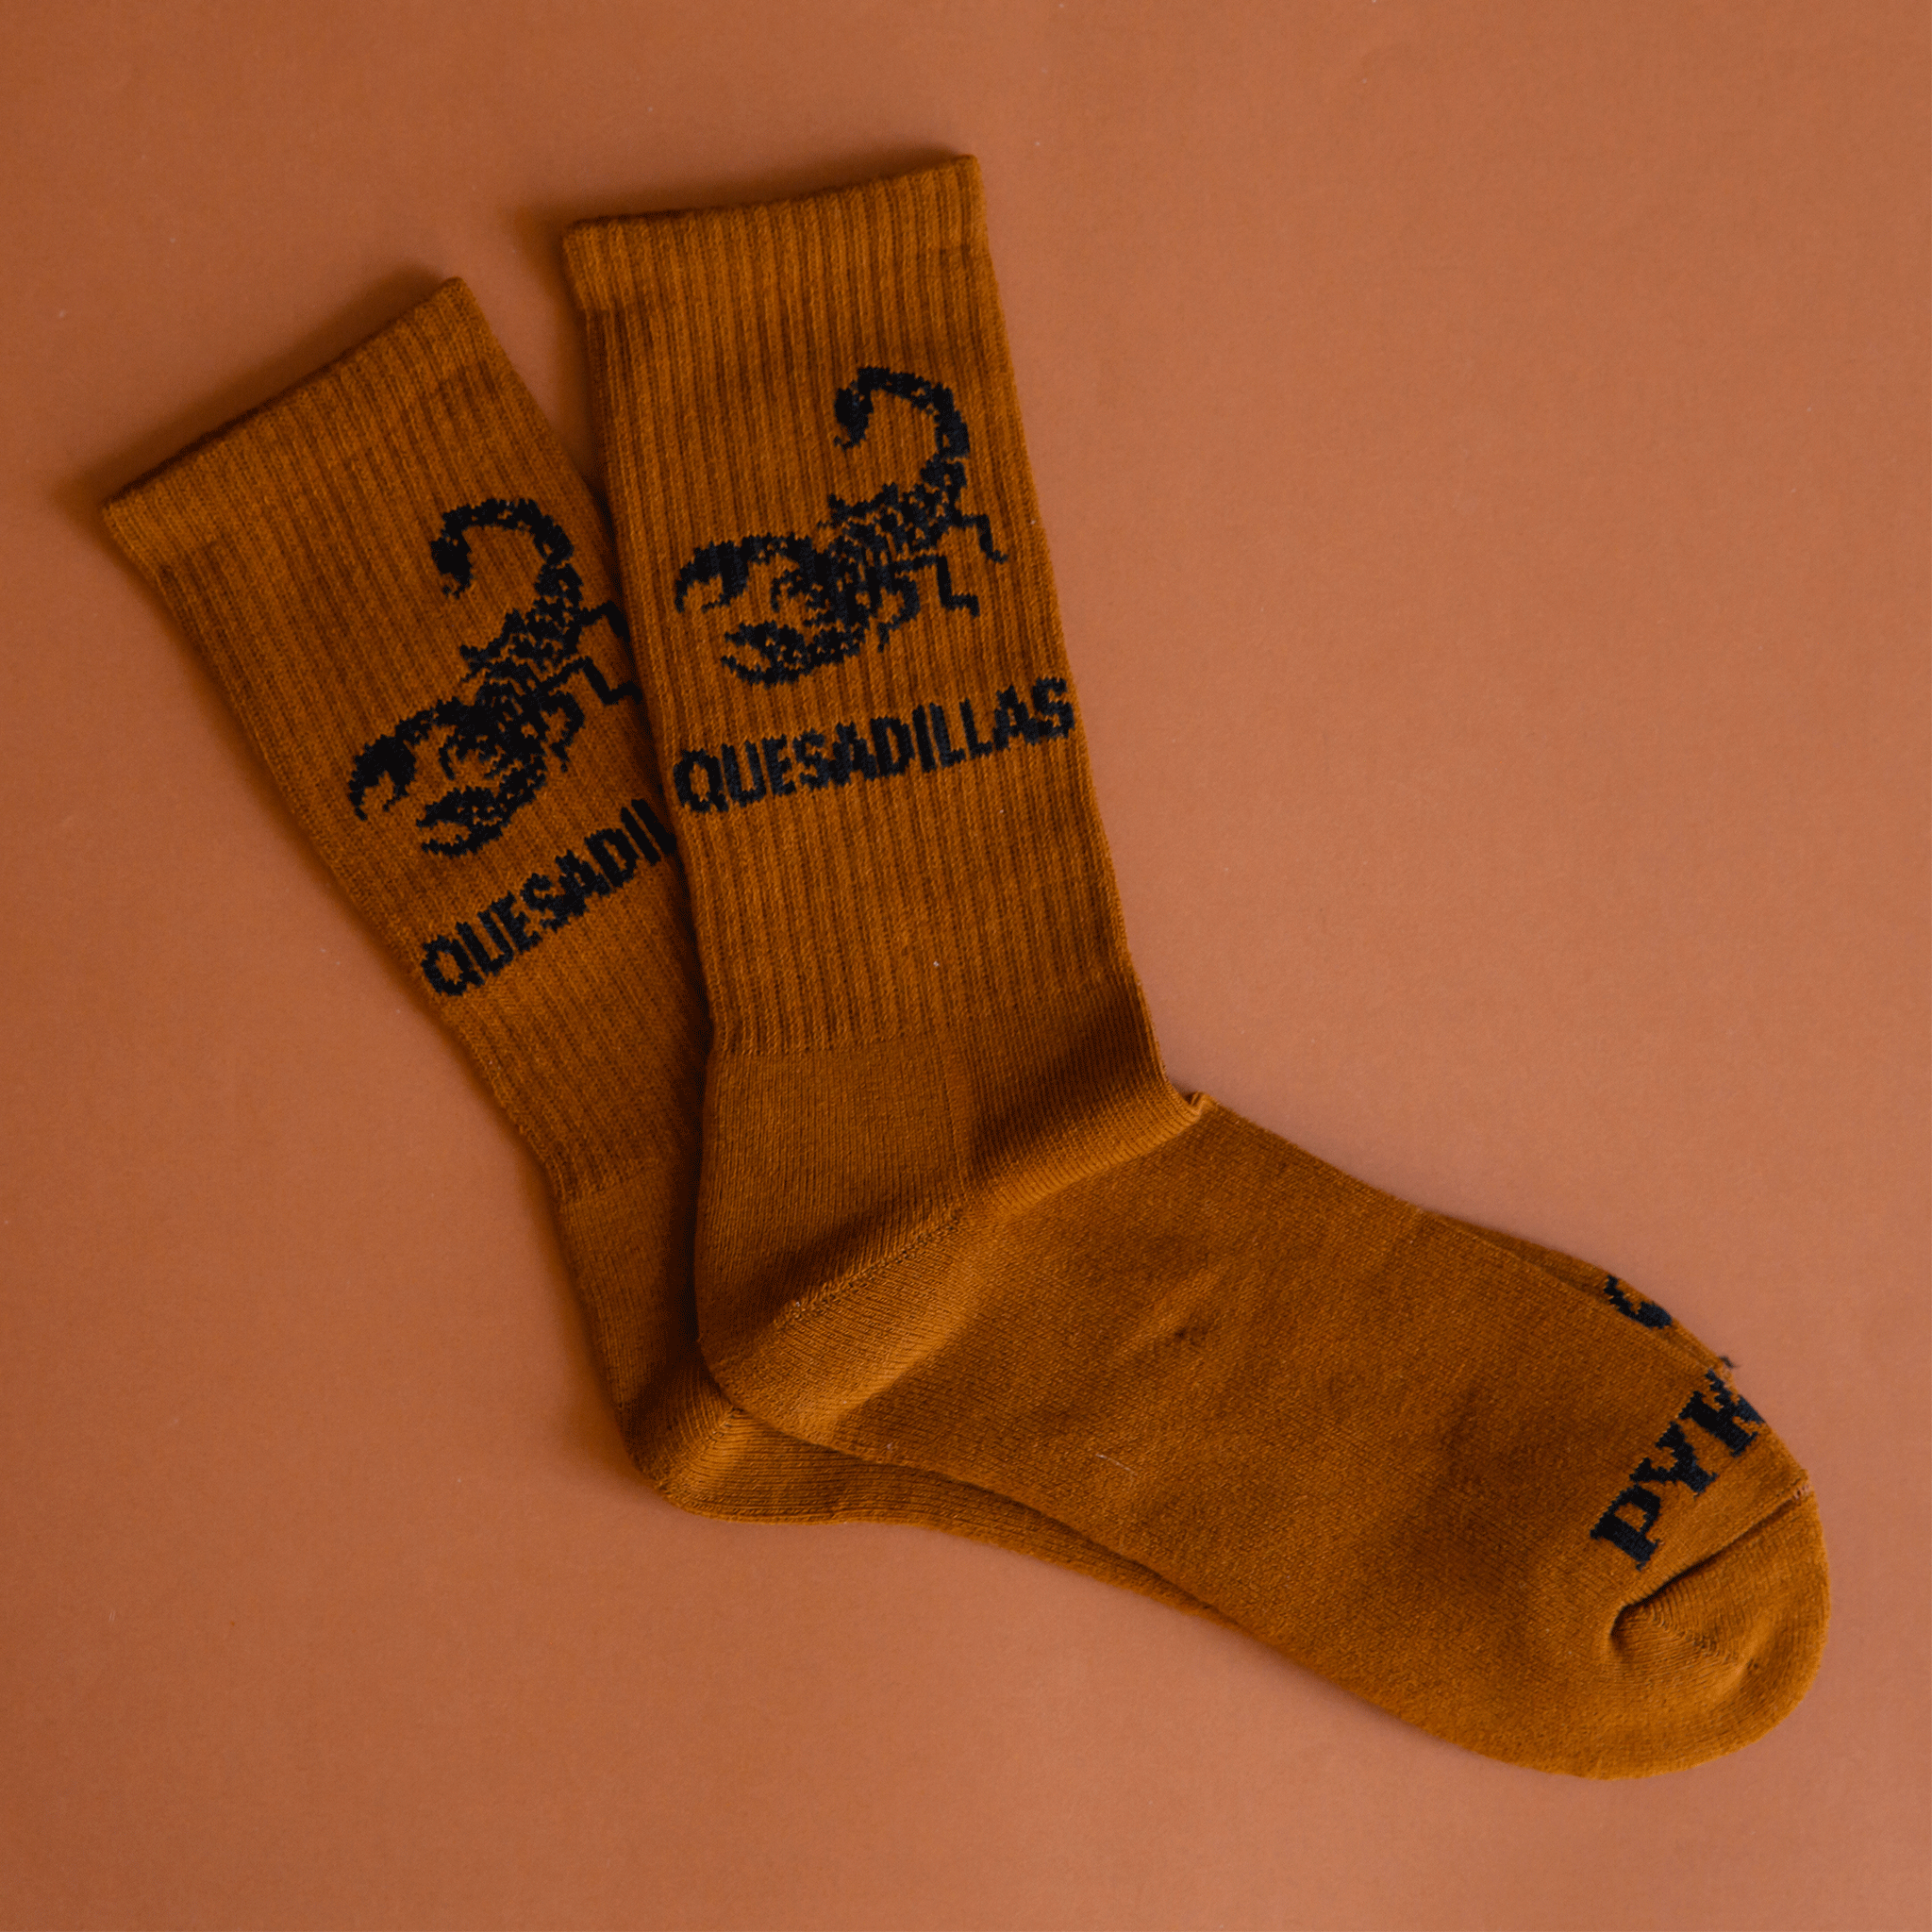 A pair of burnt orange crew socks with a black scorpion graphic and text that reads, "Quesadilla".